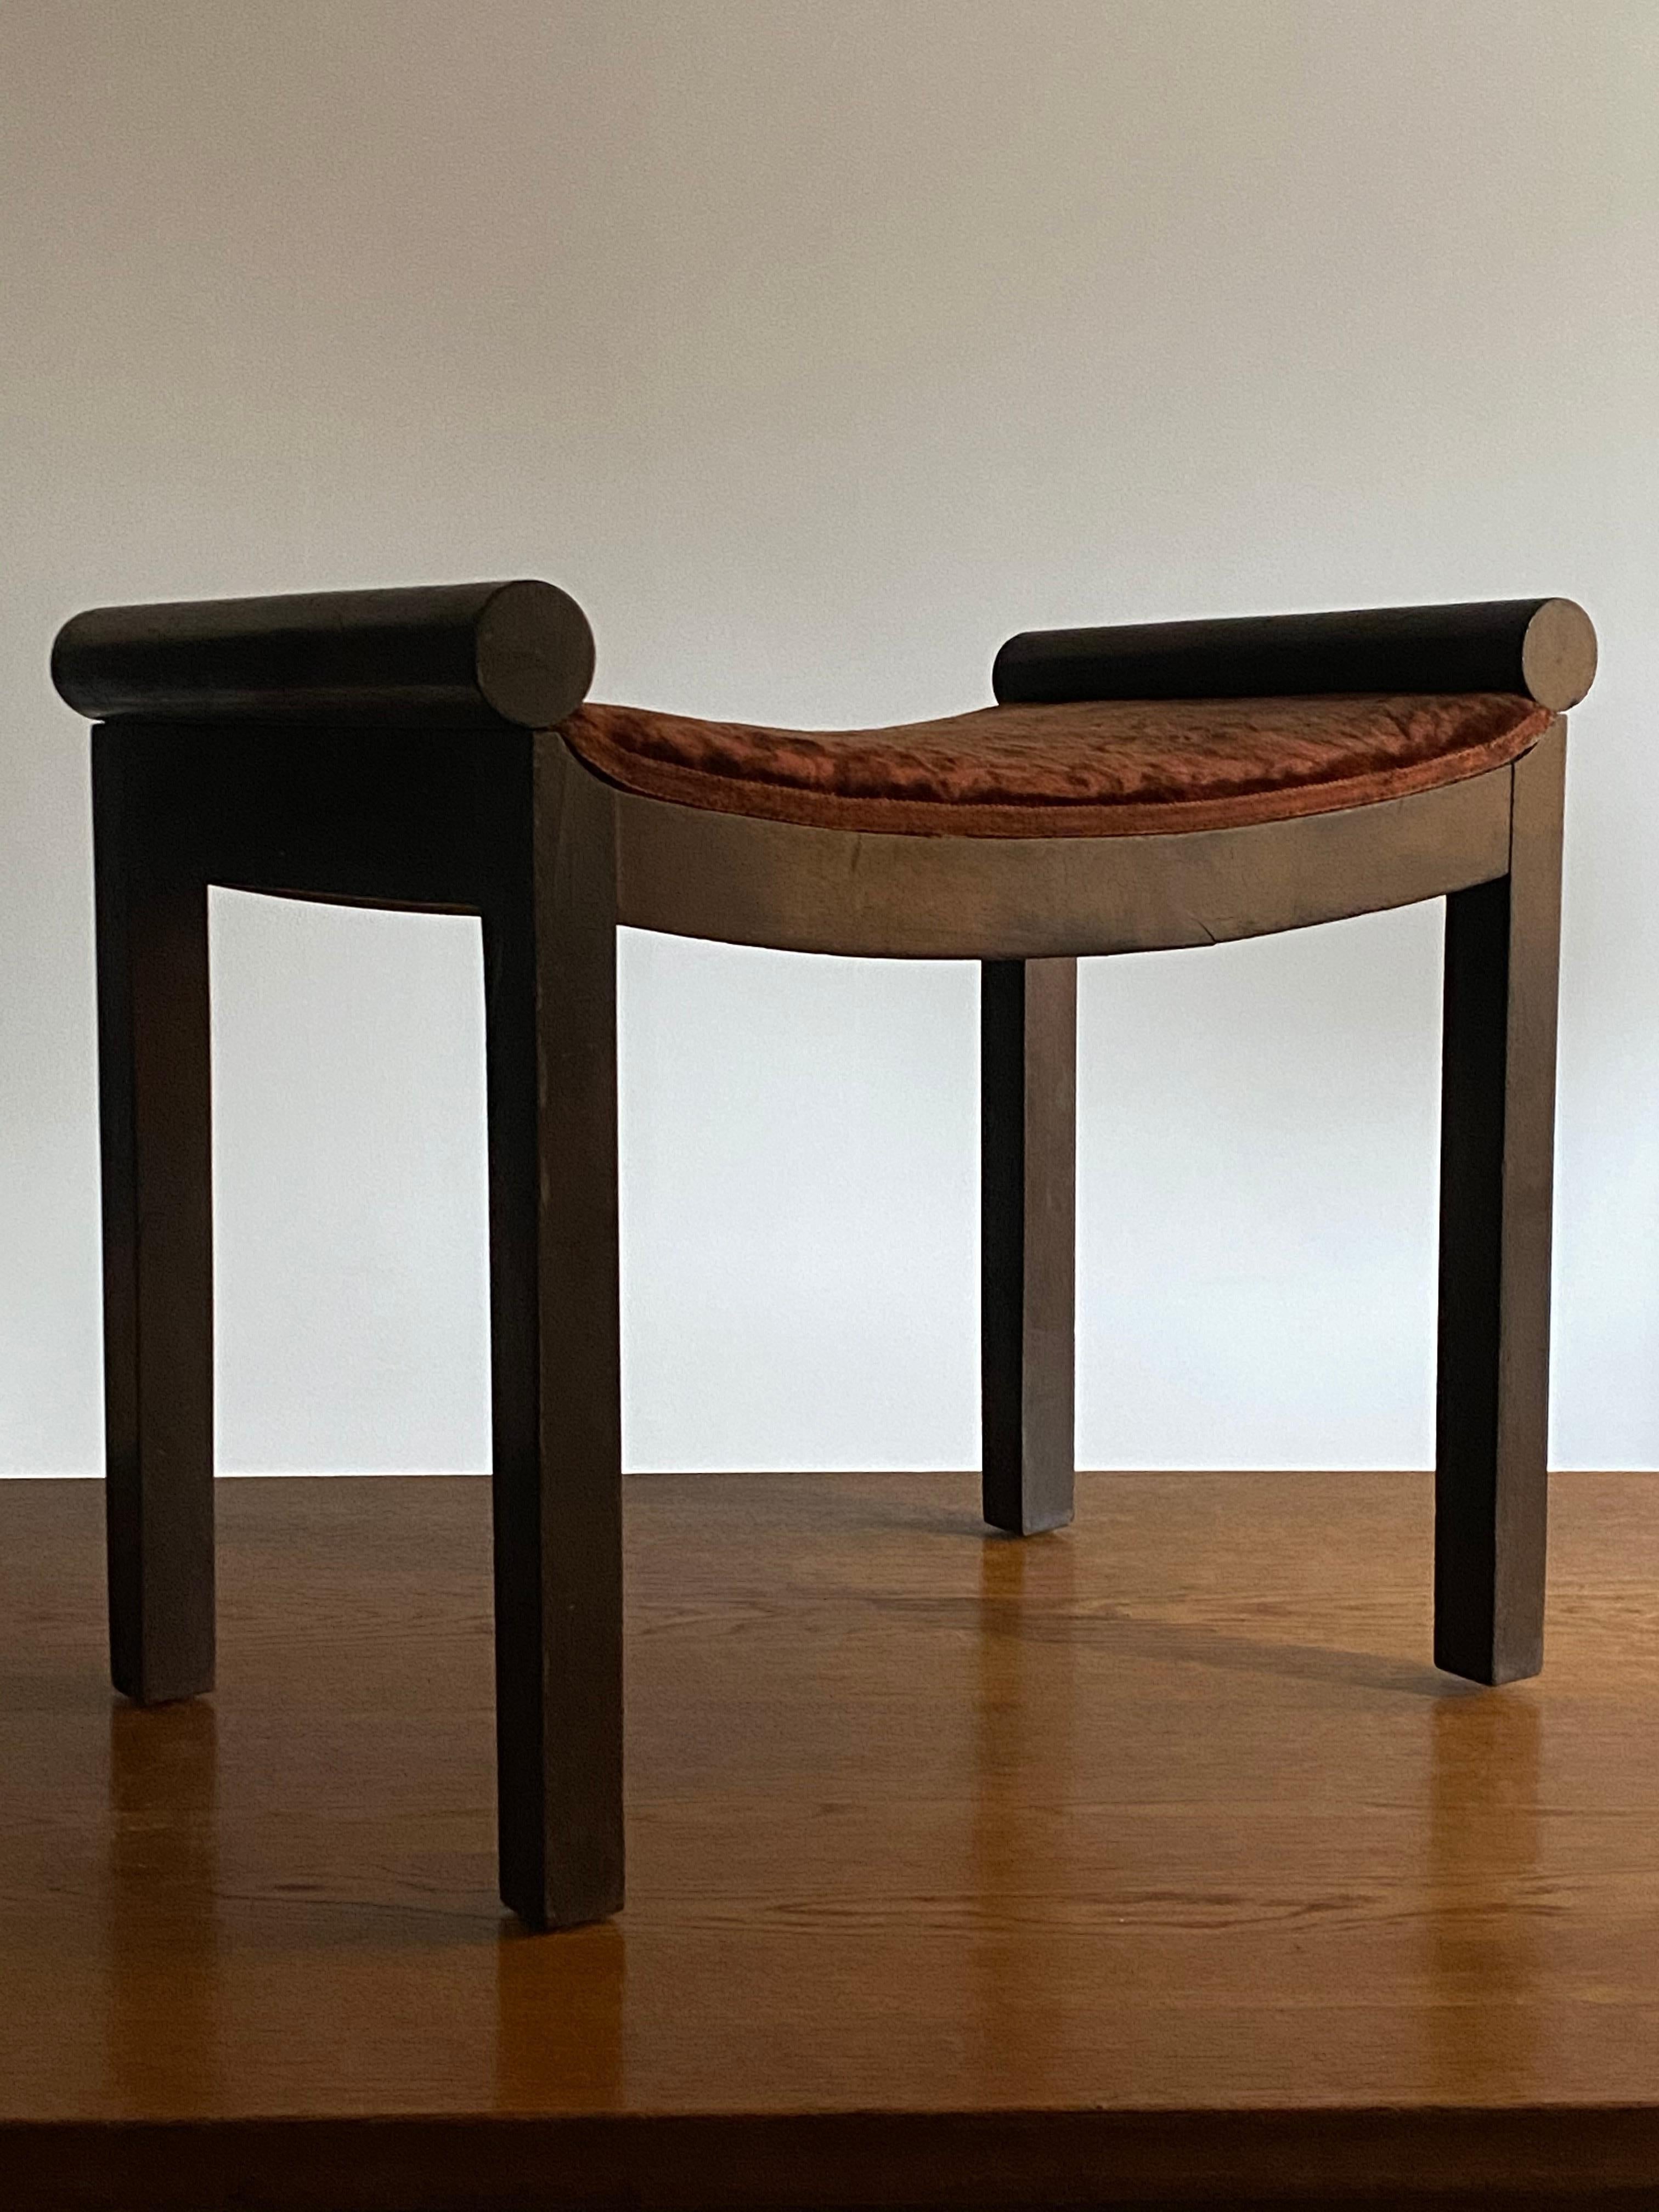 A functionalist / Art Deco stool of Swedish production and design. In dark stained wood. Original red velvet in need of replacement. 

Other designers of the period include Axel Einar Hjorth, Pierre Chareau, Eugène Printz, Josef Hoffman.